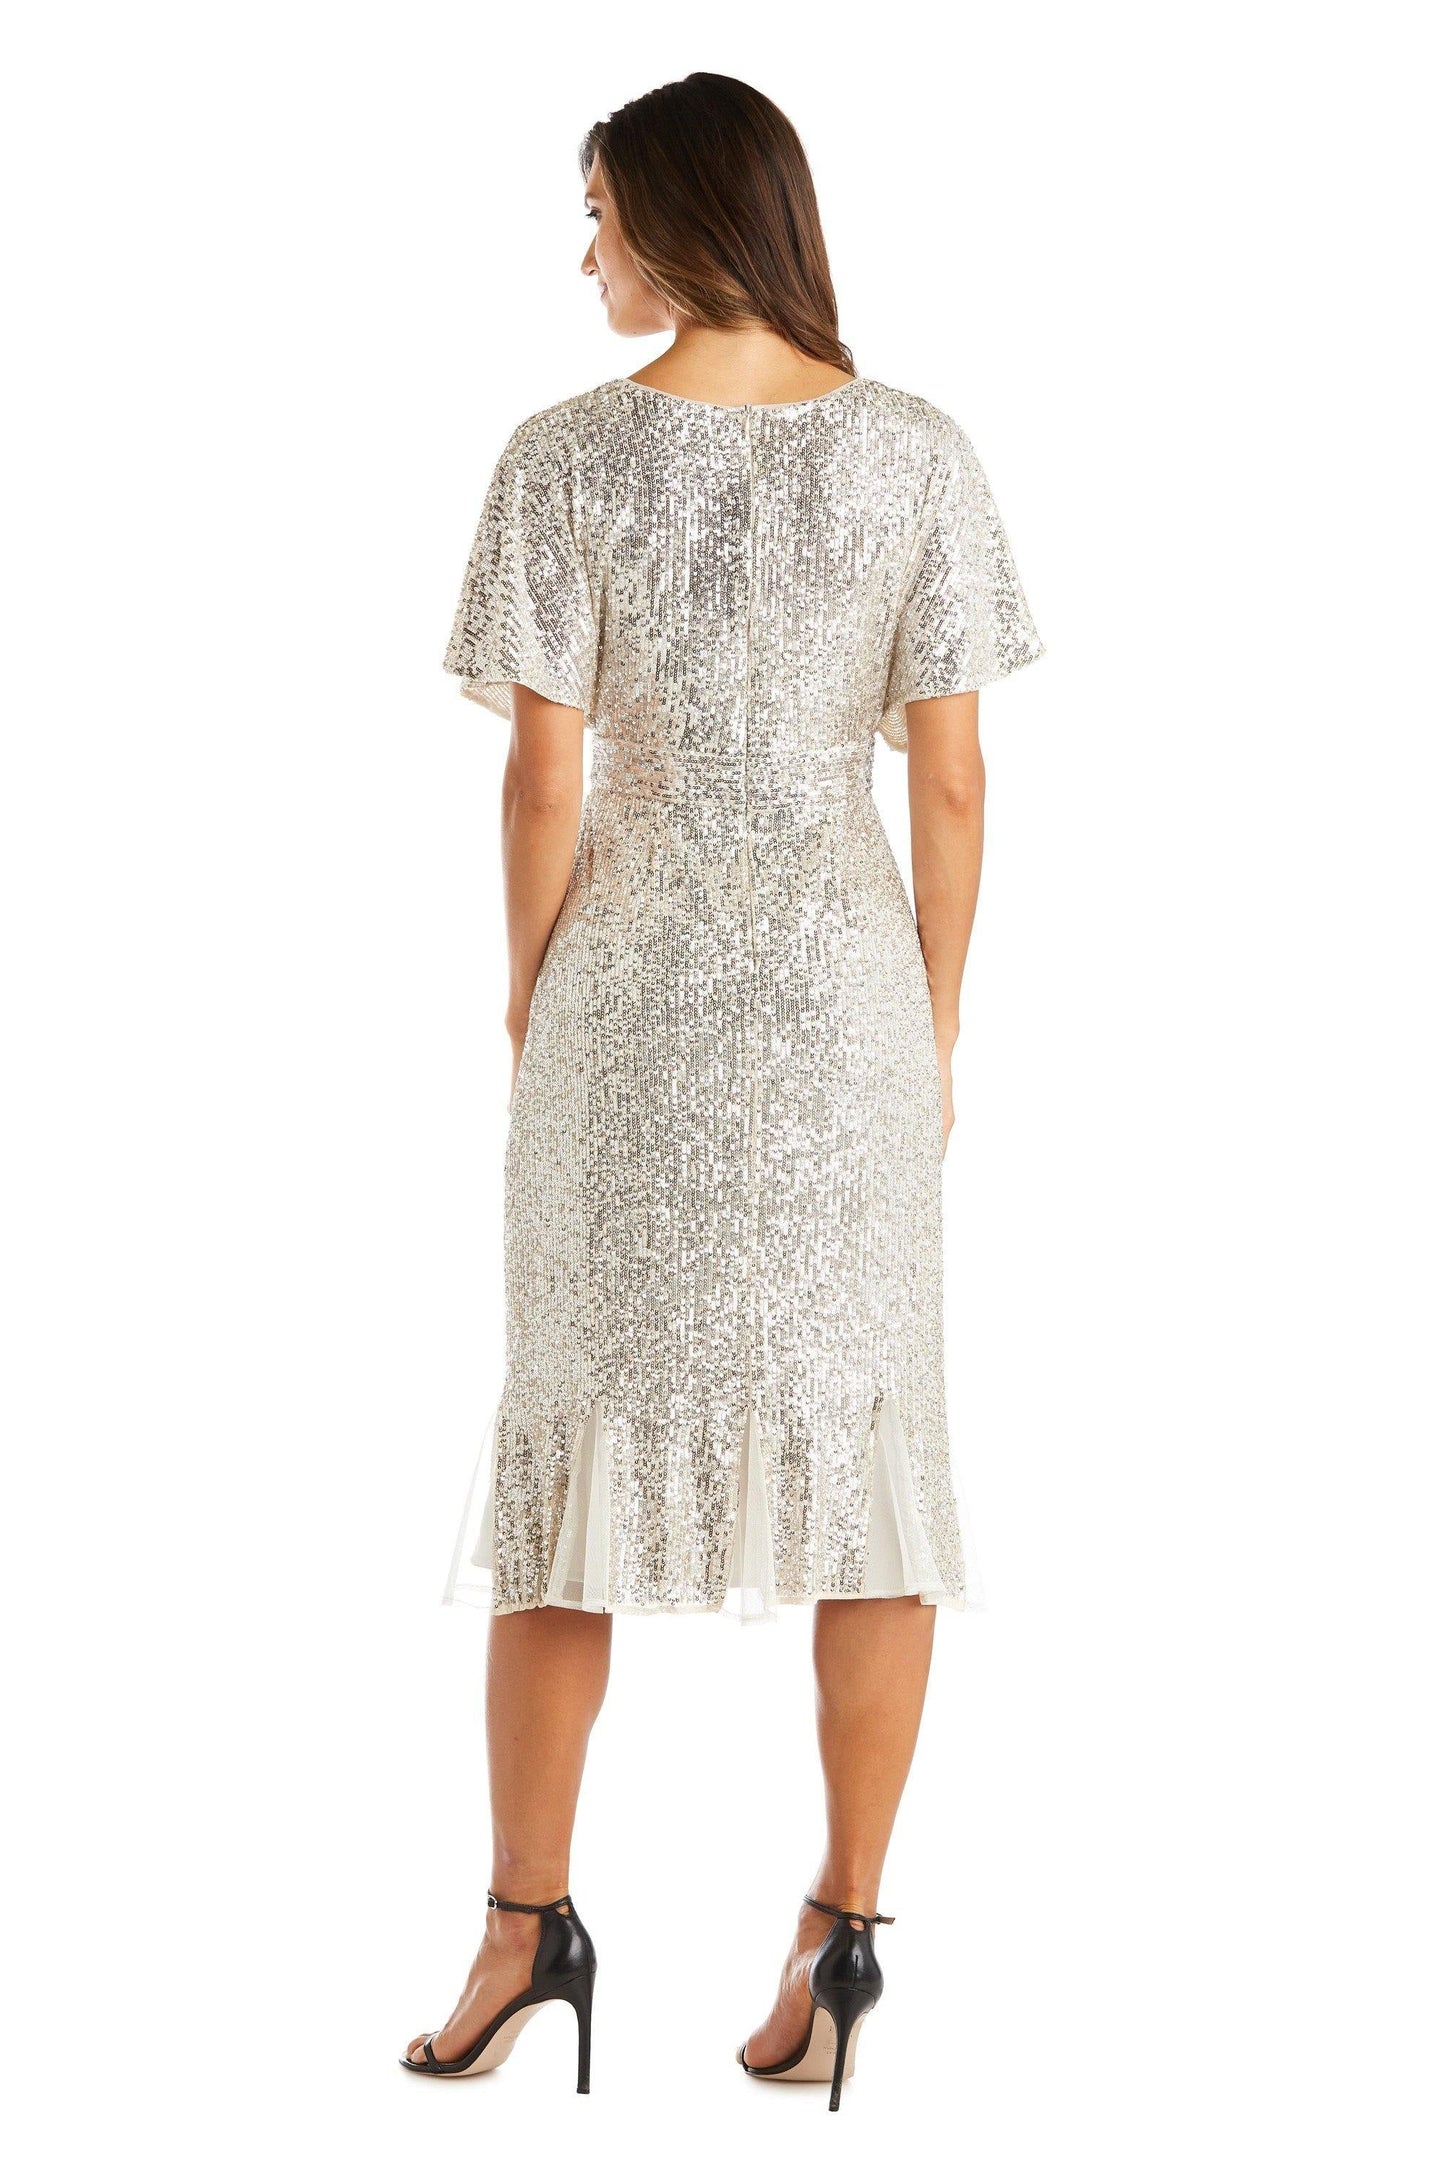 R&M Richards Mother of the Bride Sequin Dress 5922 - The Dress Outlet